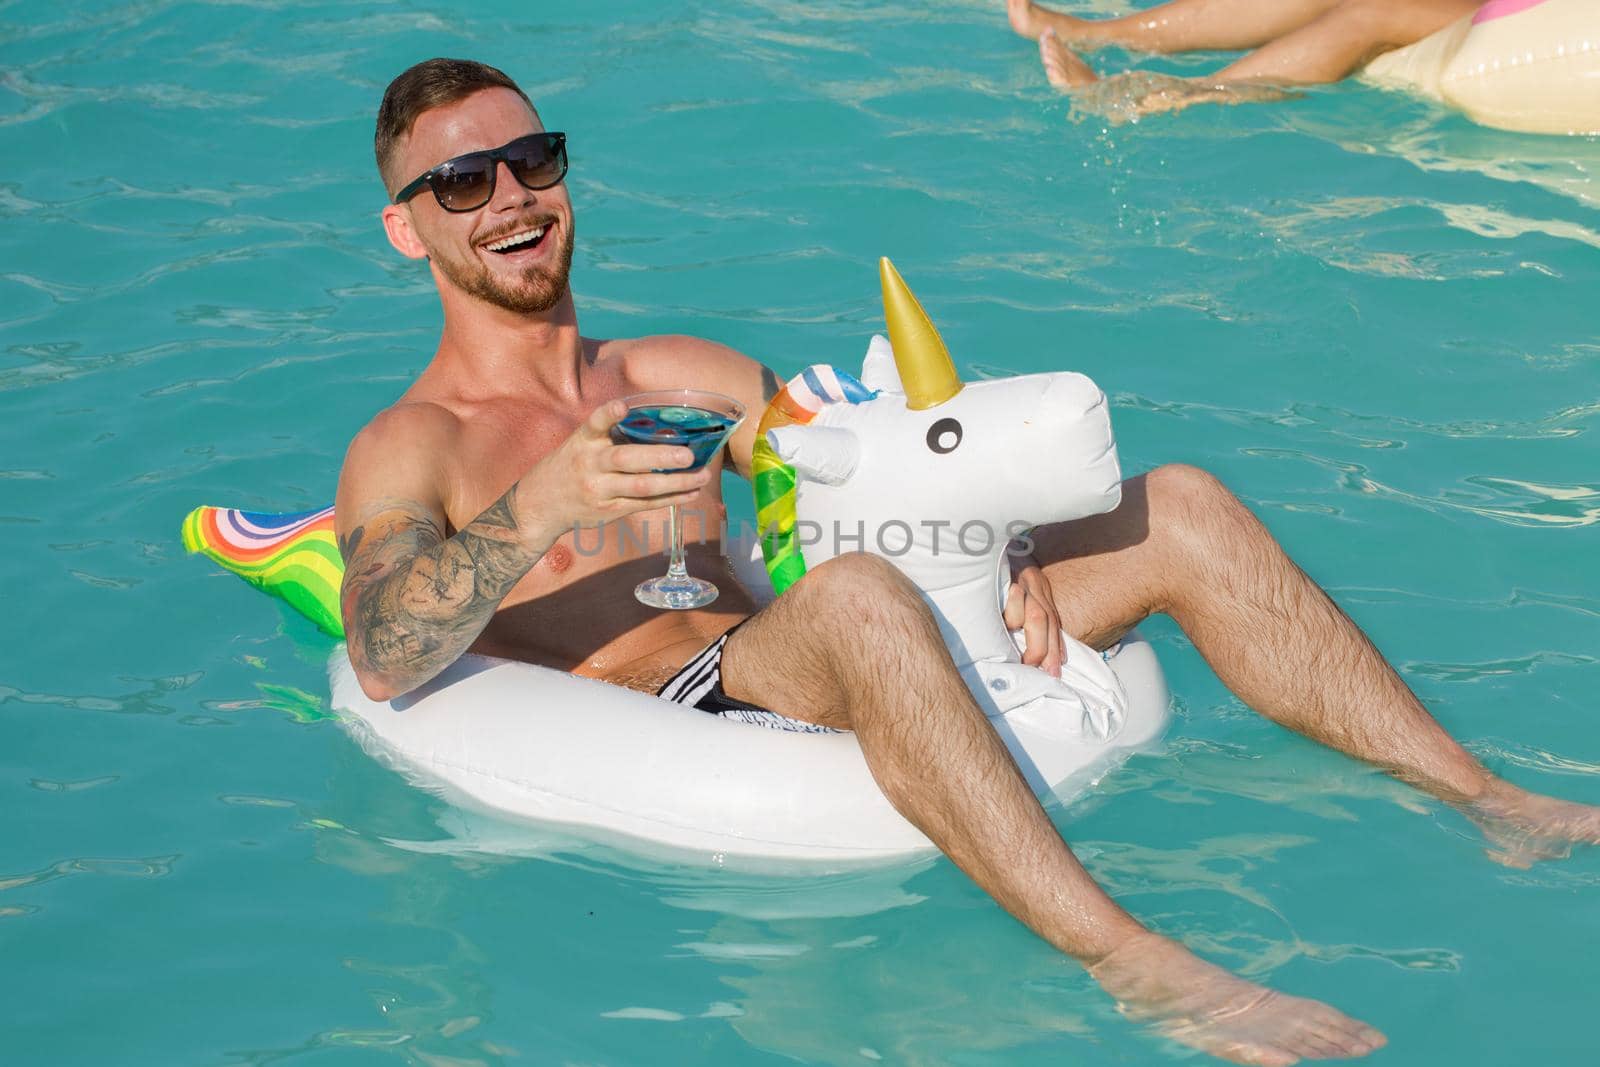 Handsome young tattooed man laughing joyfully swimming on inflatable unicorn at the pool. Cheerful man holding up his drink, enjoying day at the pool, relaxing on inflatable ring. Vacation, travel concept